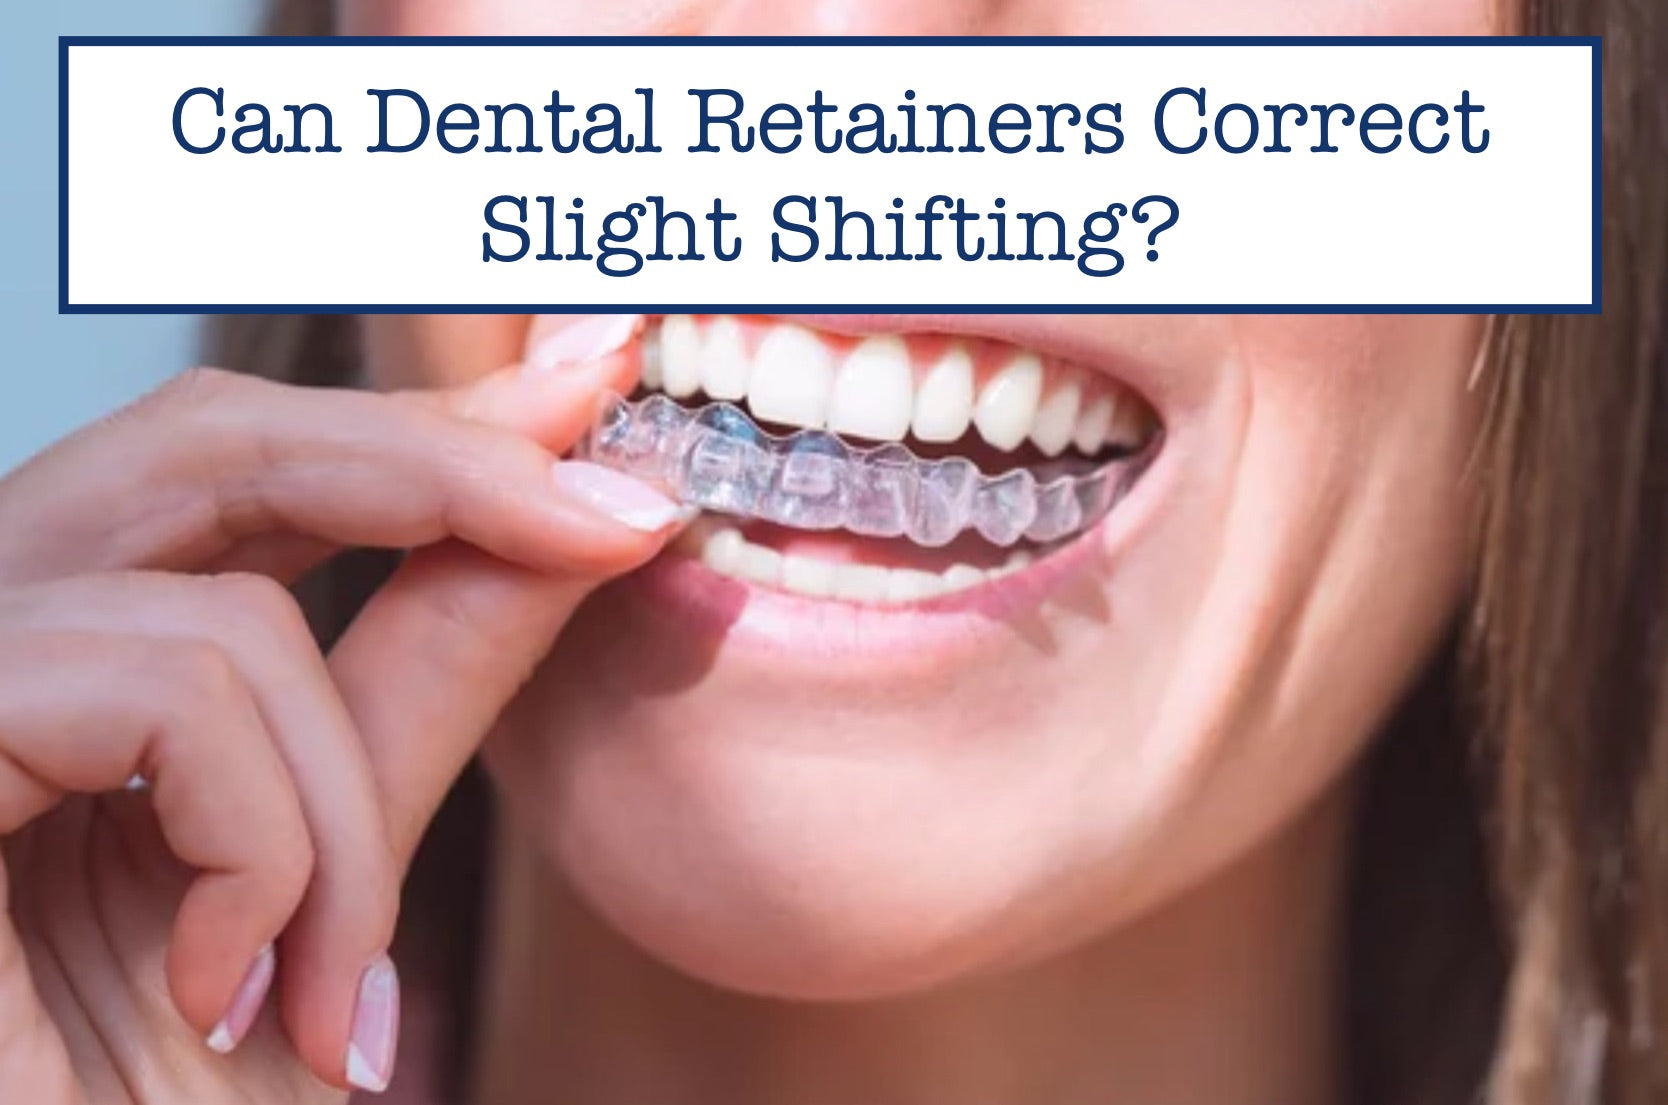 Can Dental Retainers Correct Slight Shifting?